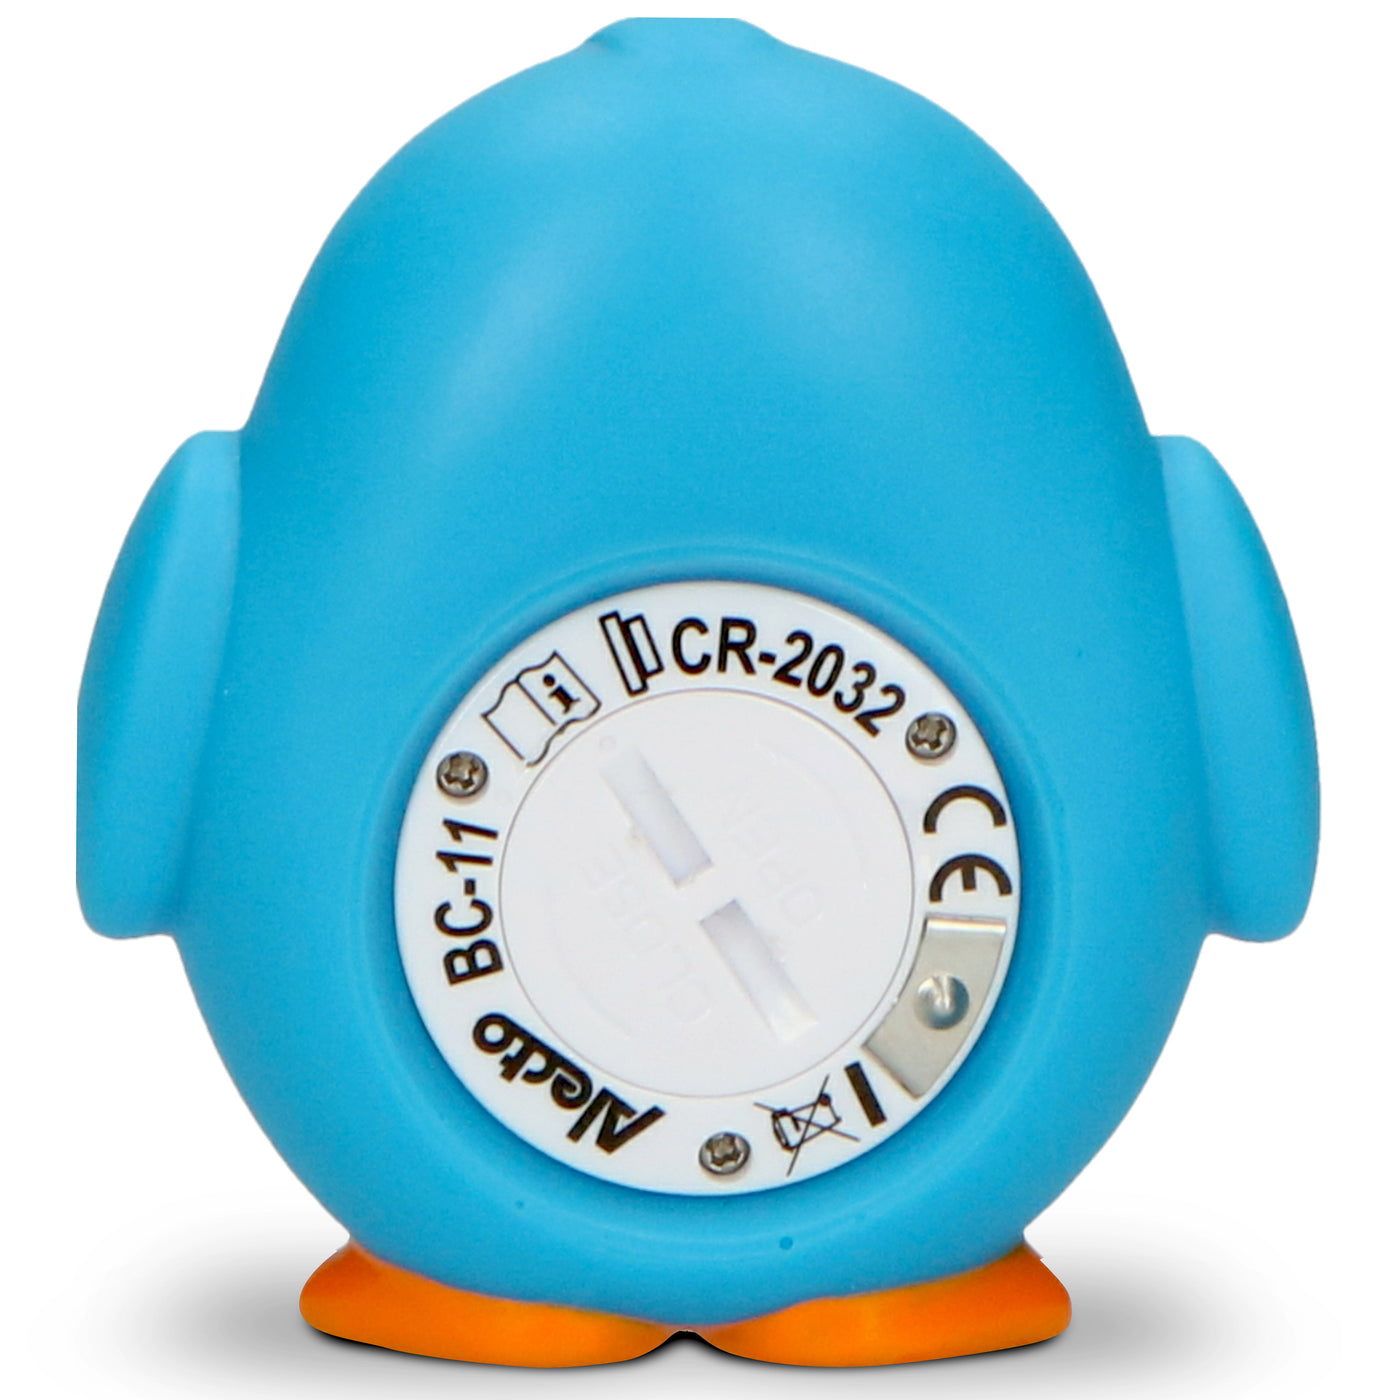 Alecto BC-11 PENGUIN - Badethermometer und Raumthermometer, Pinguin